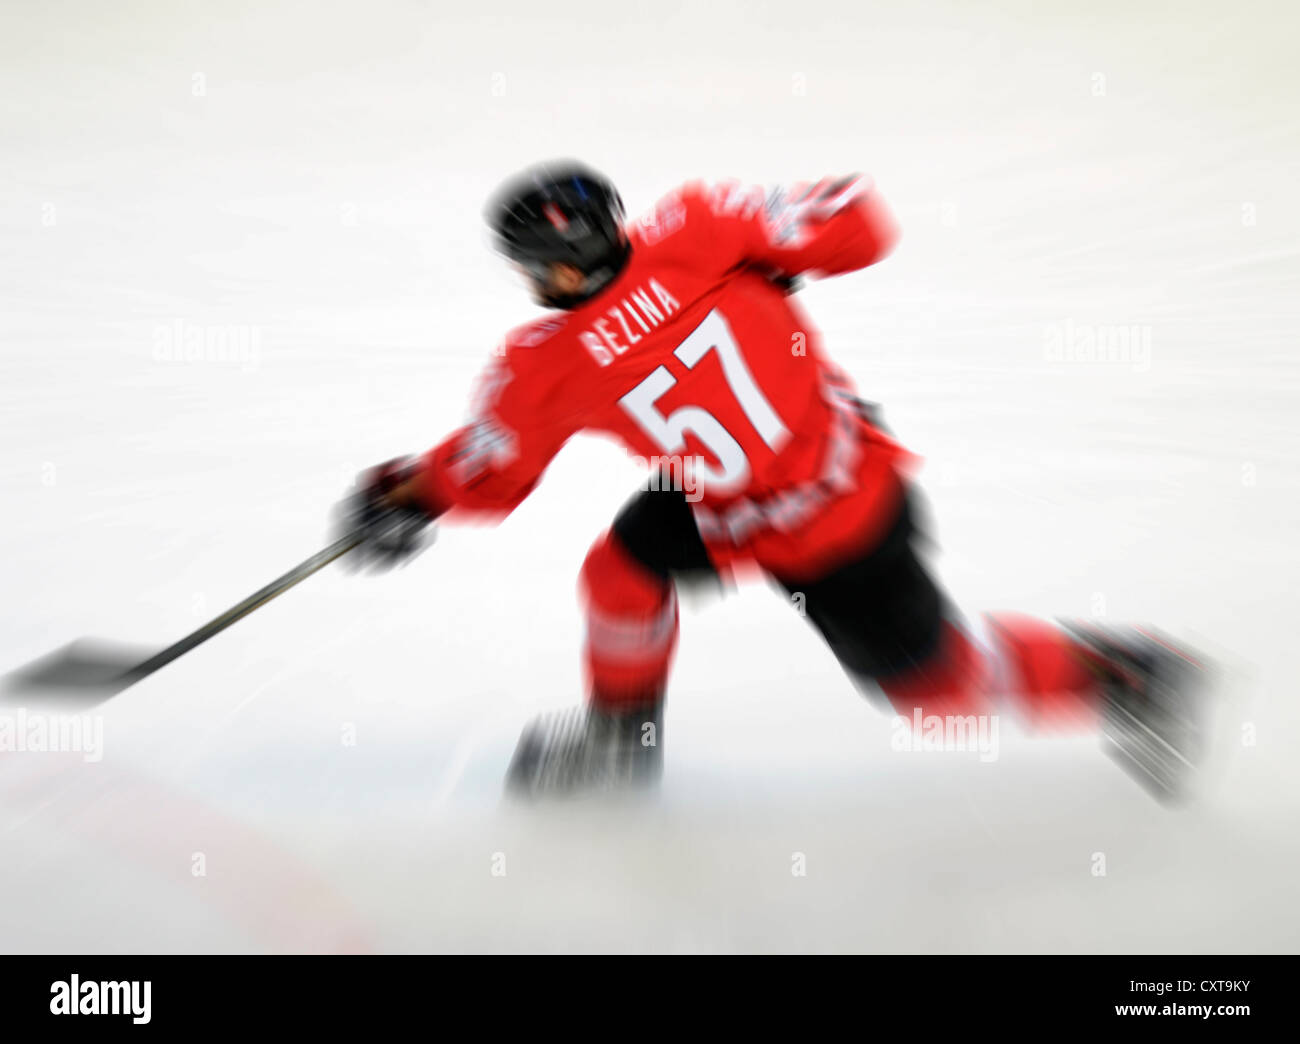 Ice hockey player in action Stock Photo